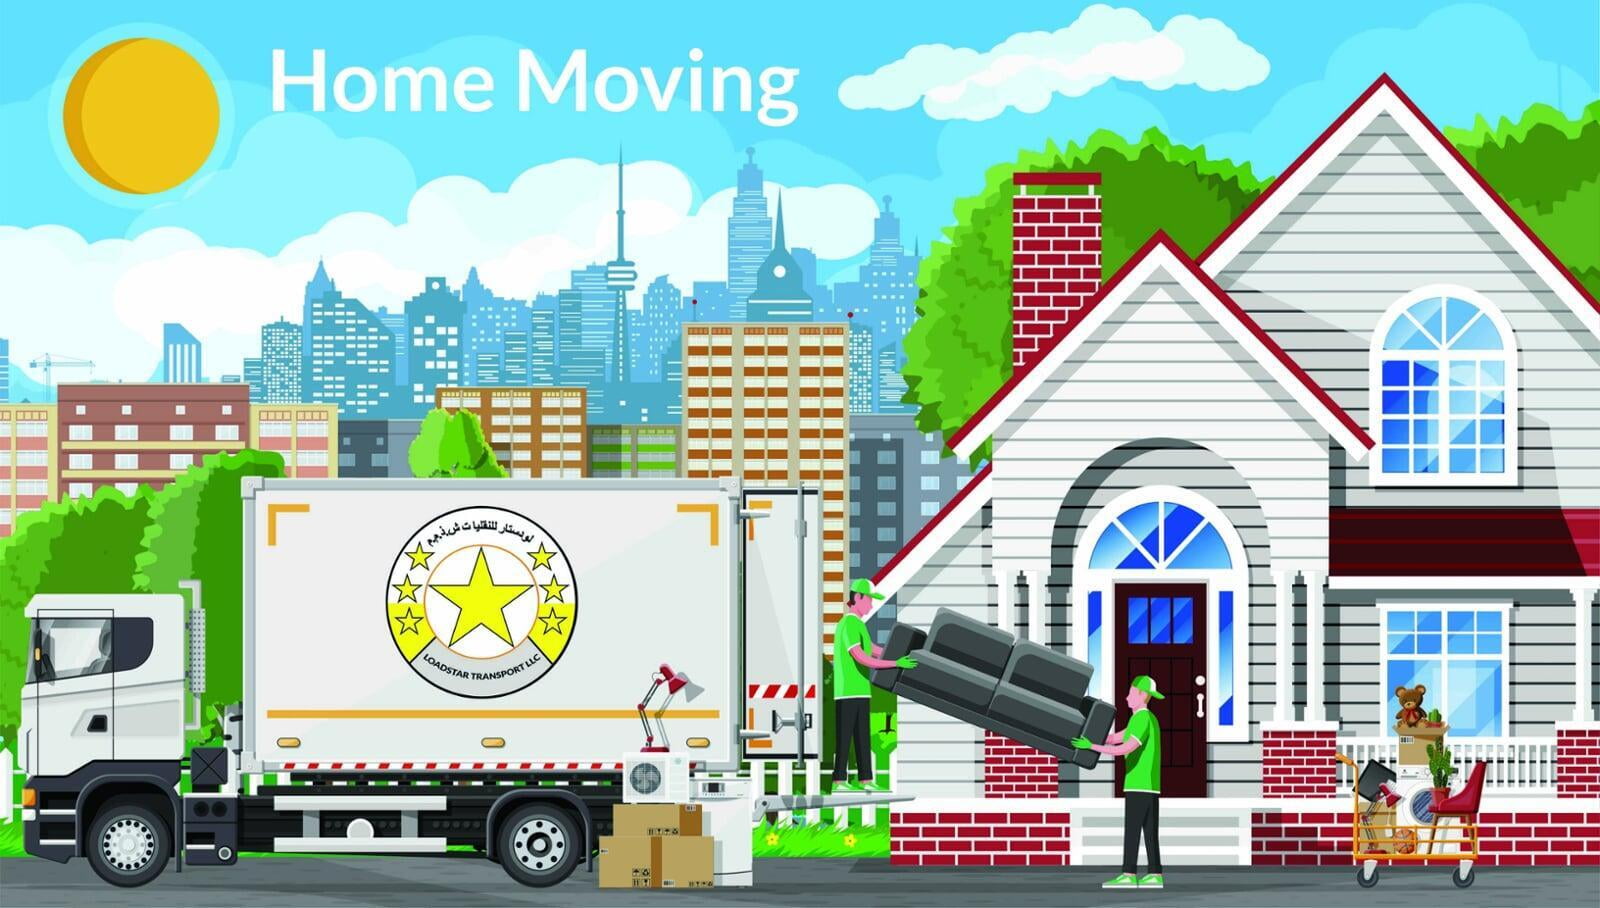 home moving, house shifting, furniture moving